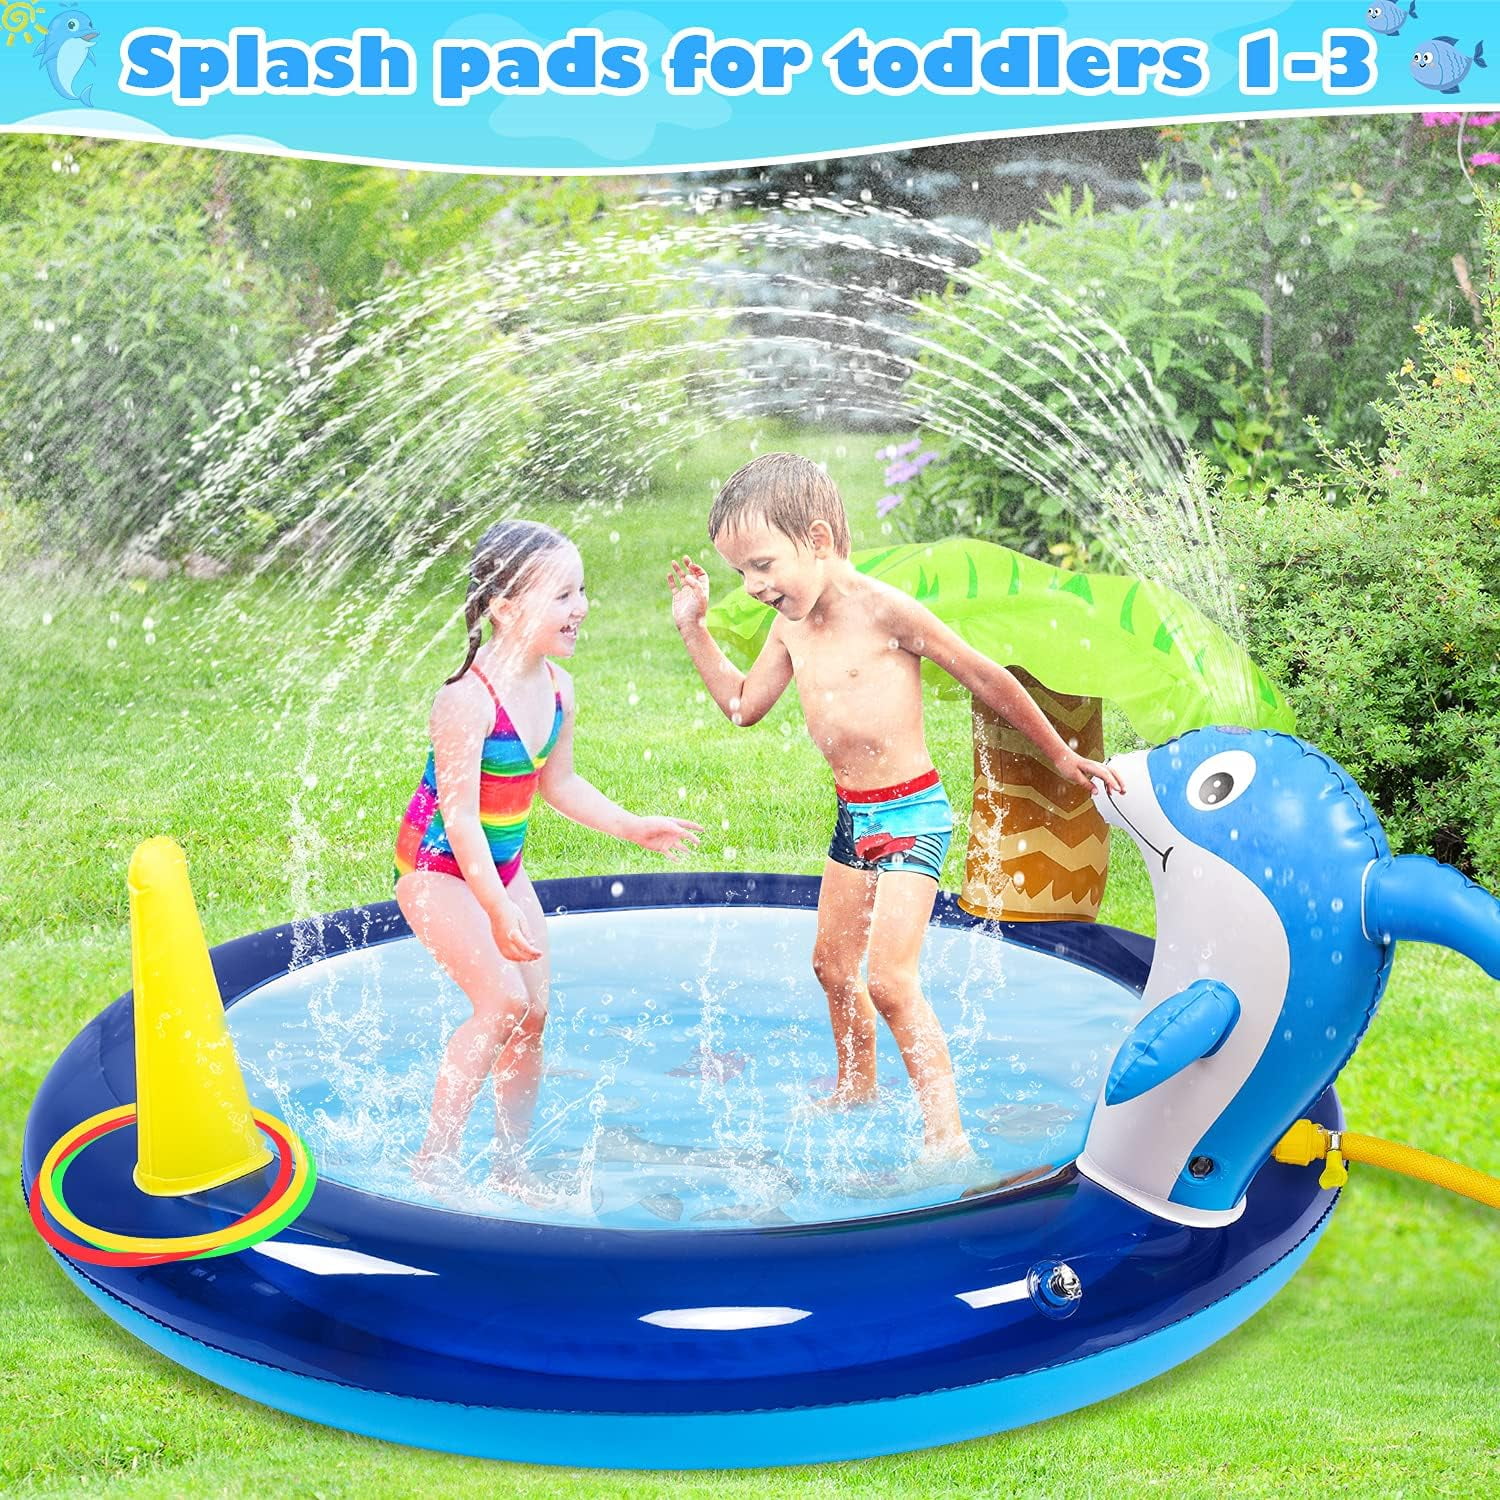 Dolphin Inflatable Swimming Pool Kids Outdoor Play Pool